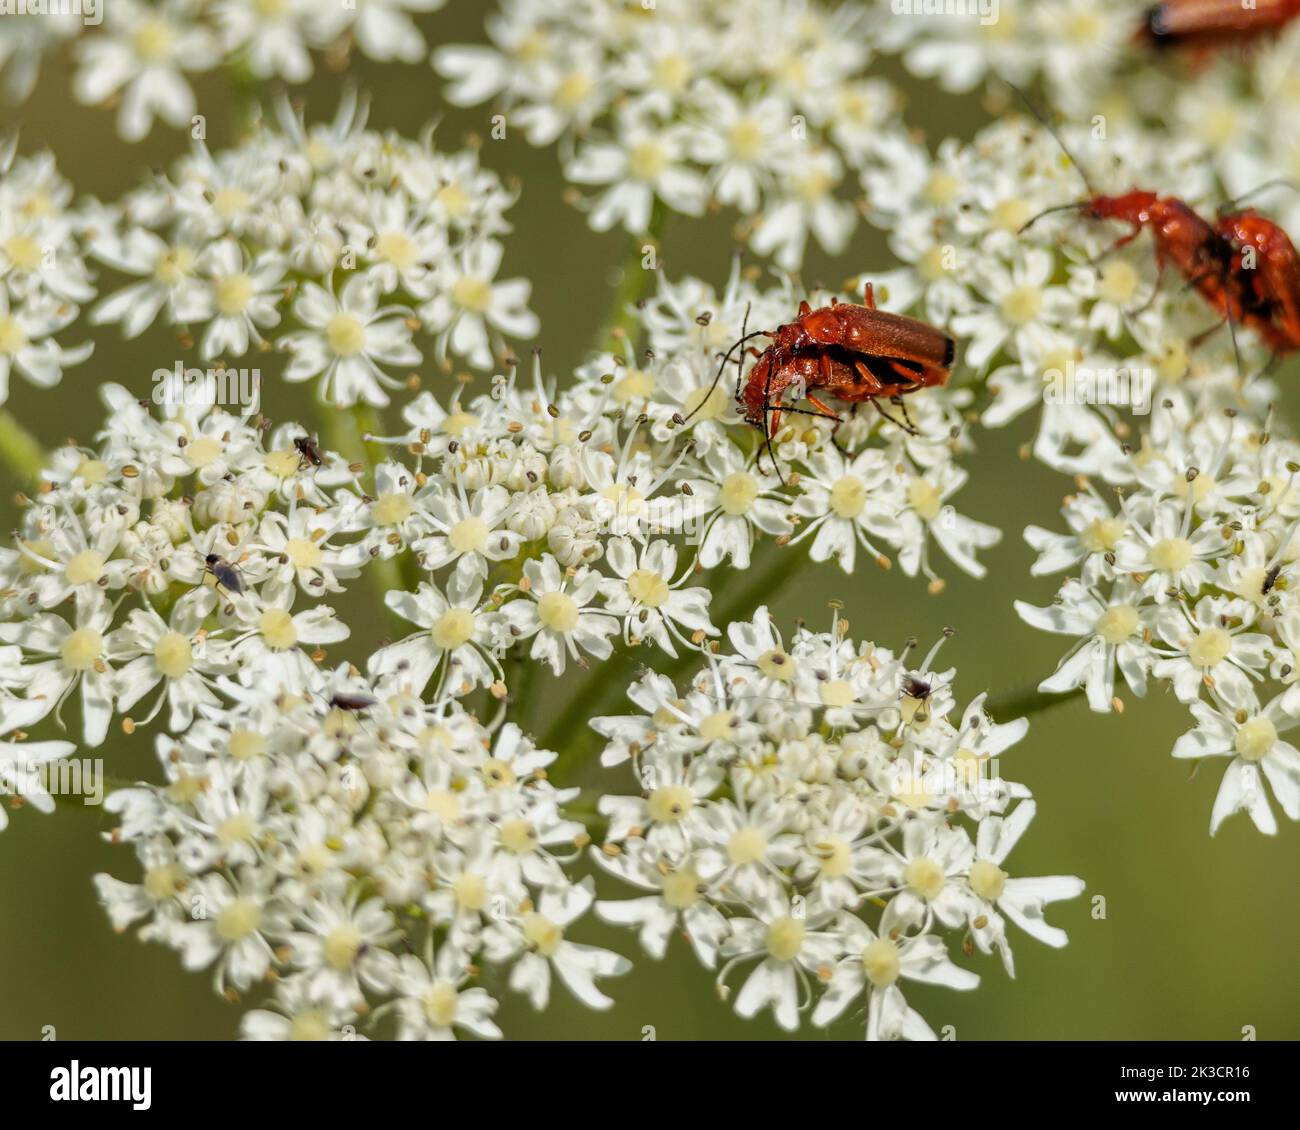 A close-up shot of red beetles on seseli white flowers Stock Photo